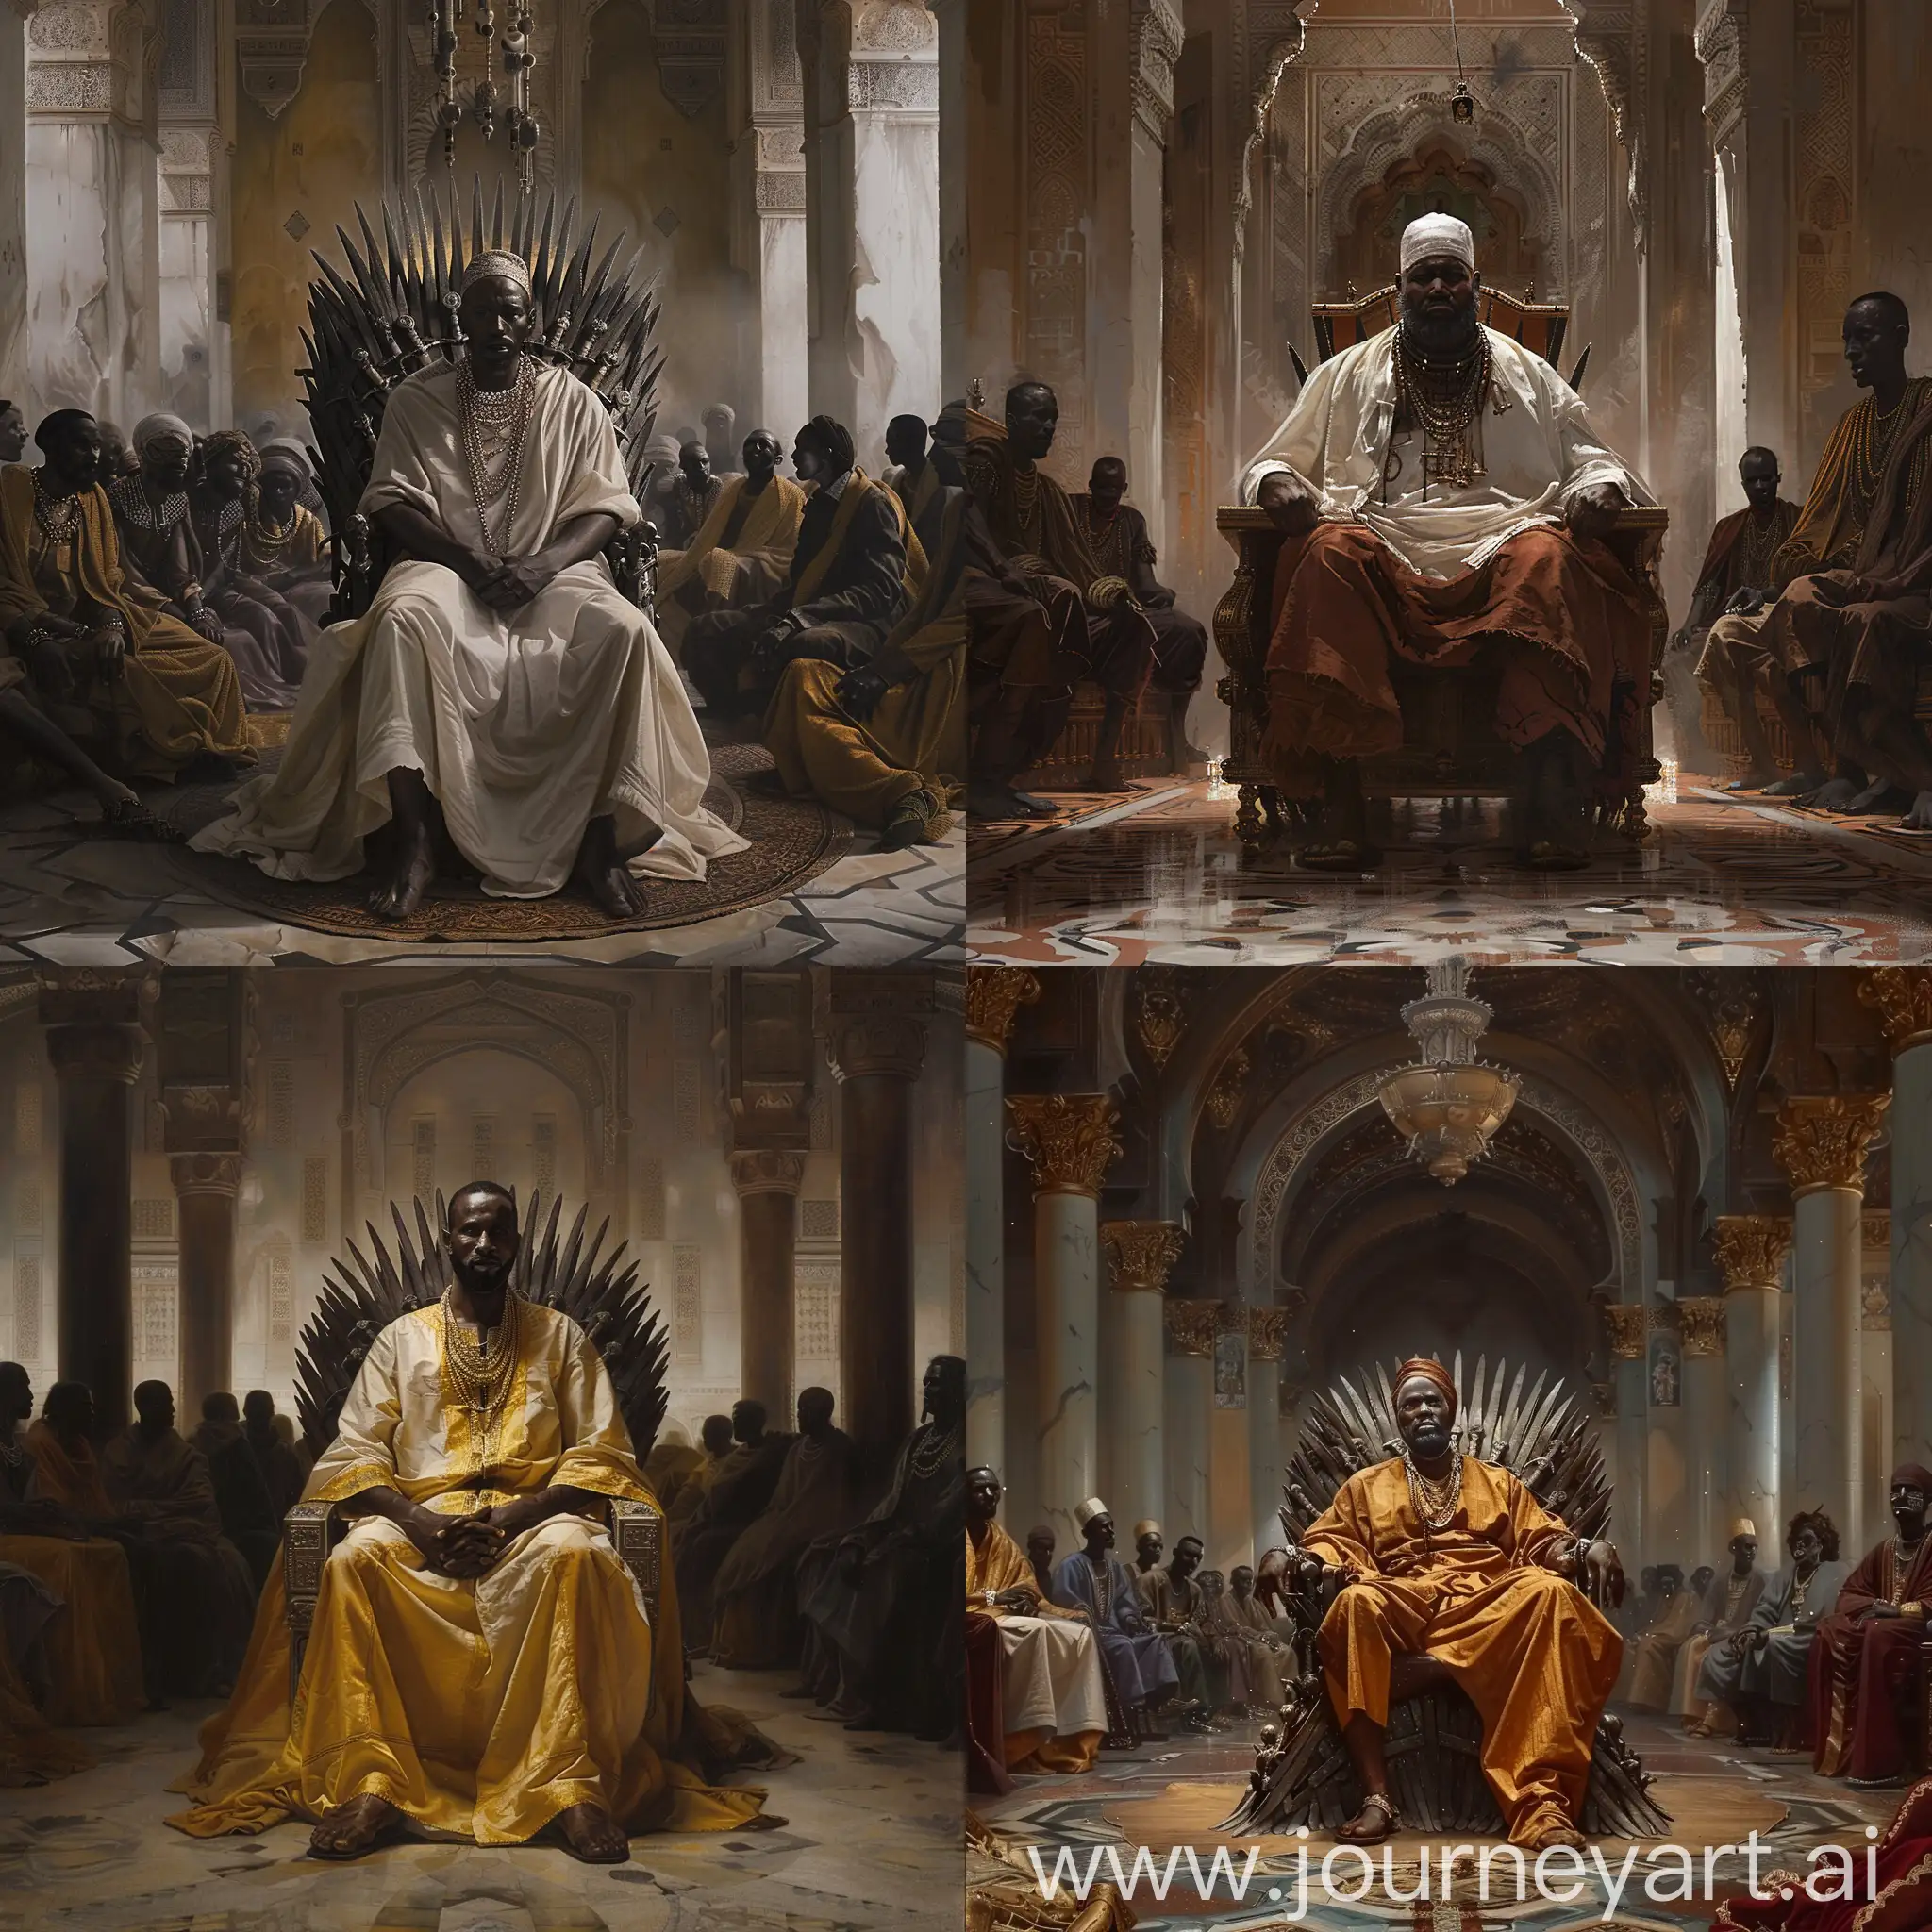 Mosaab Abdalla a Sudanese man sitting in a throne in a wide room with a room full of subjects in dark periods